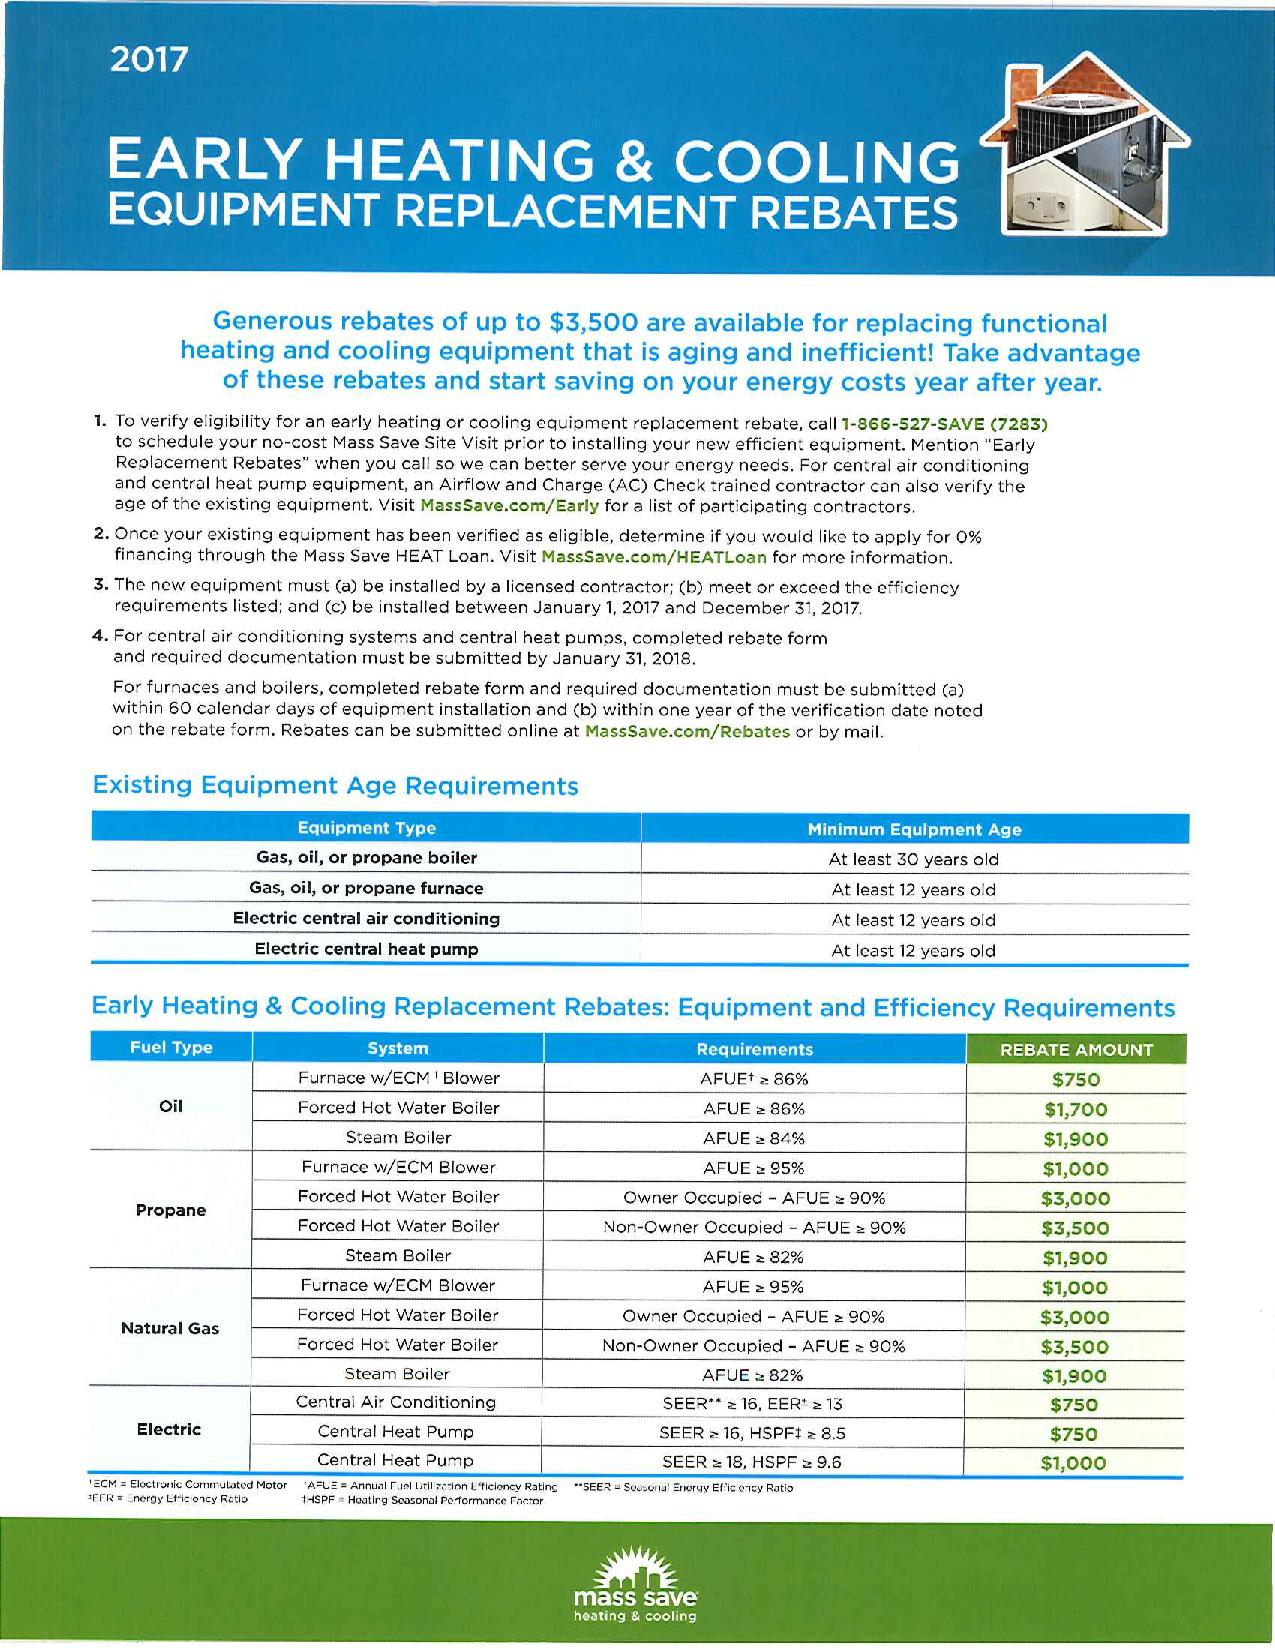 a-complete-guide-to-mass-save-s-heat-pump-rebates-energysage